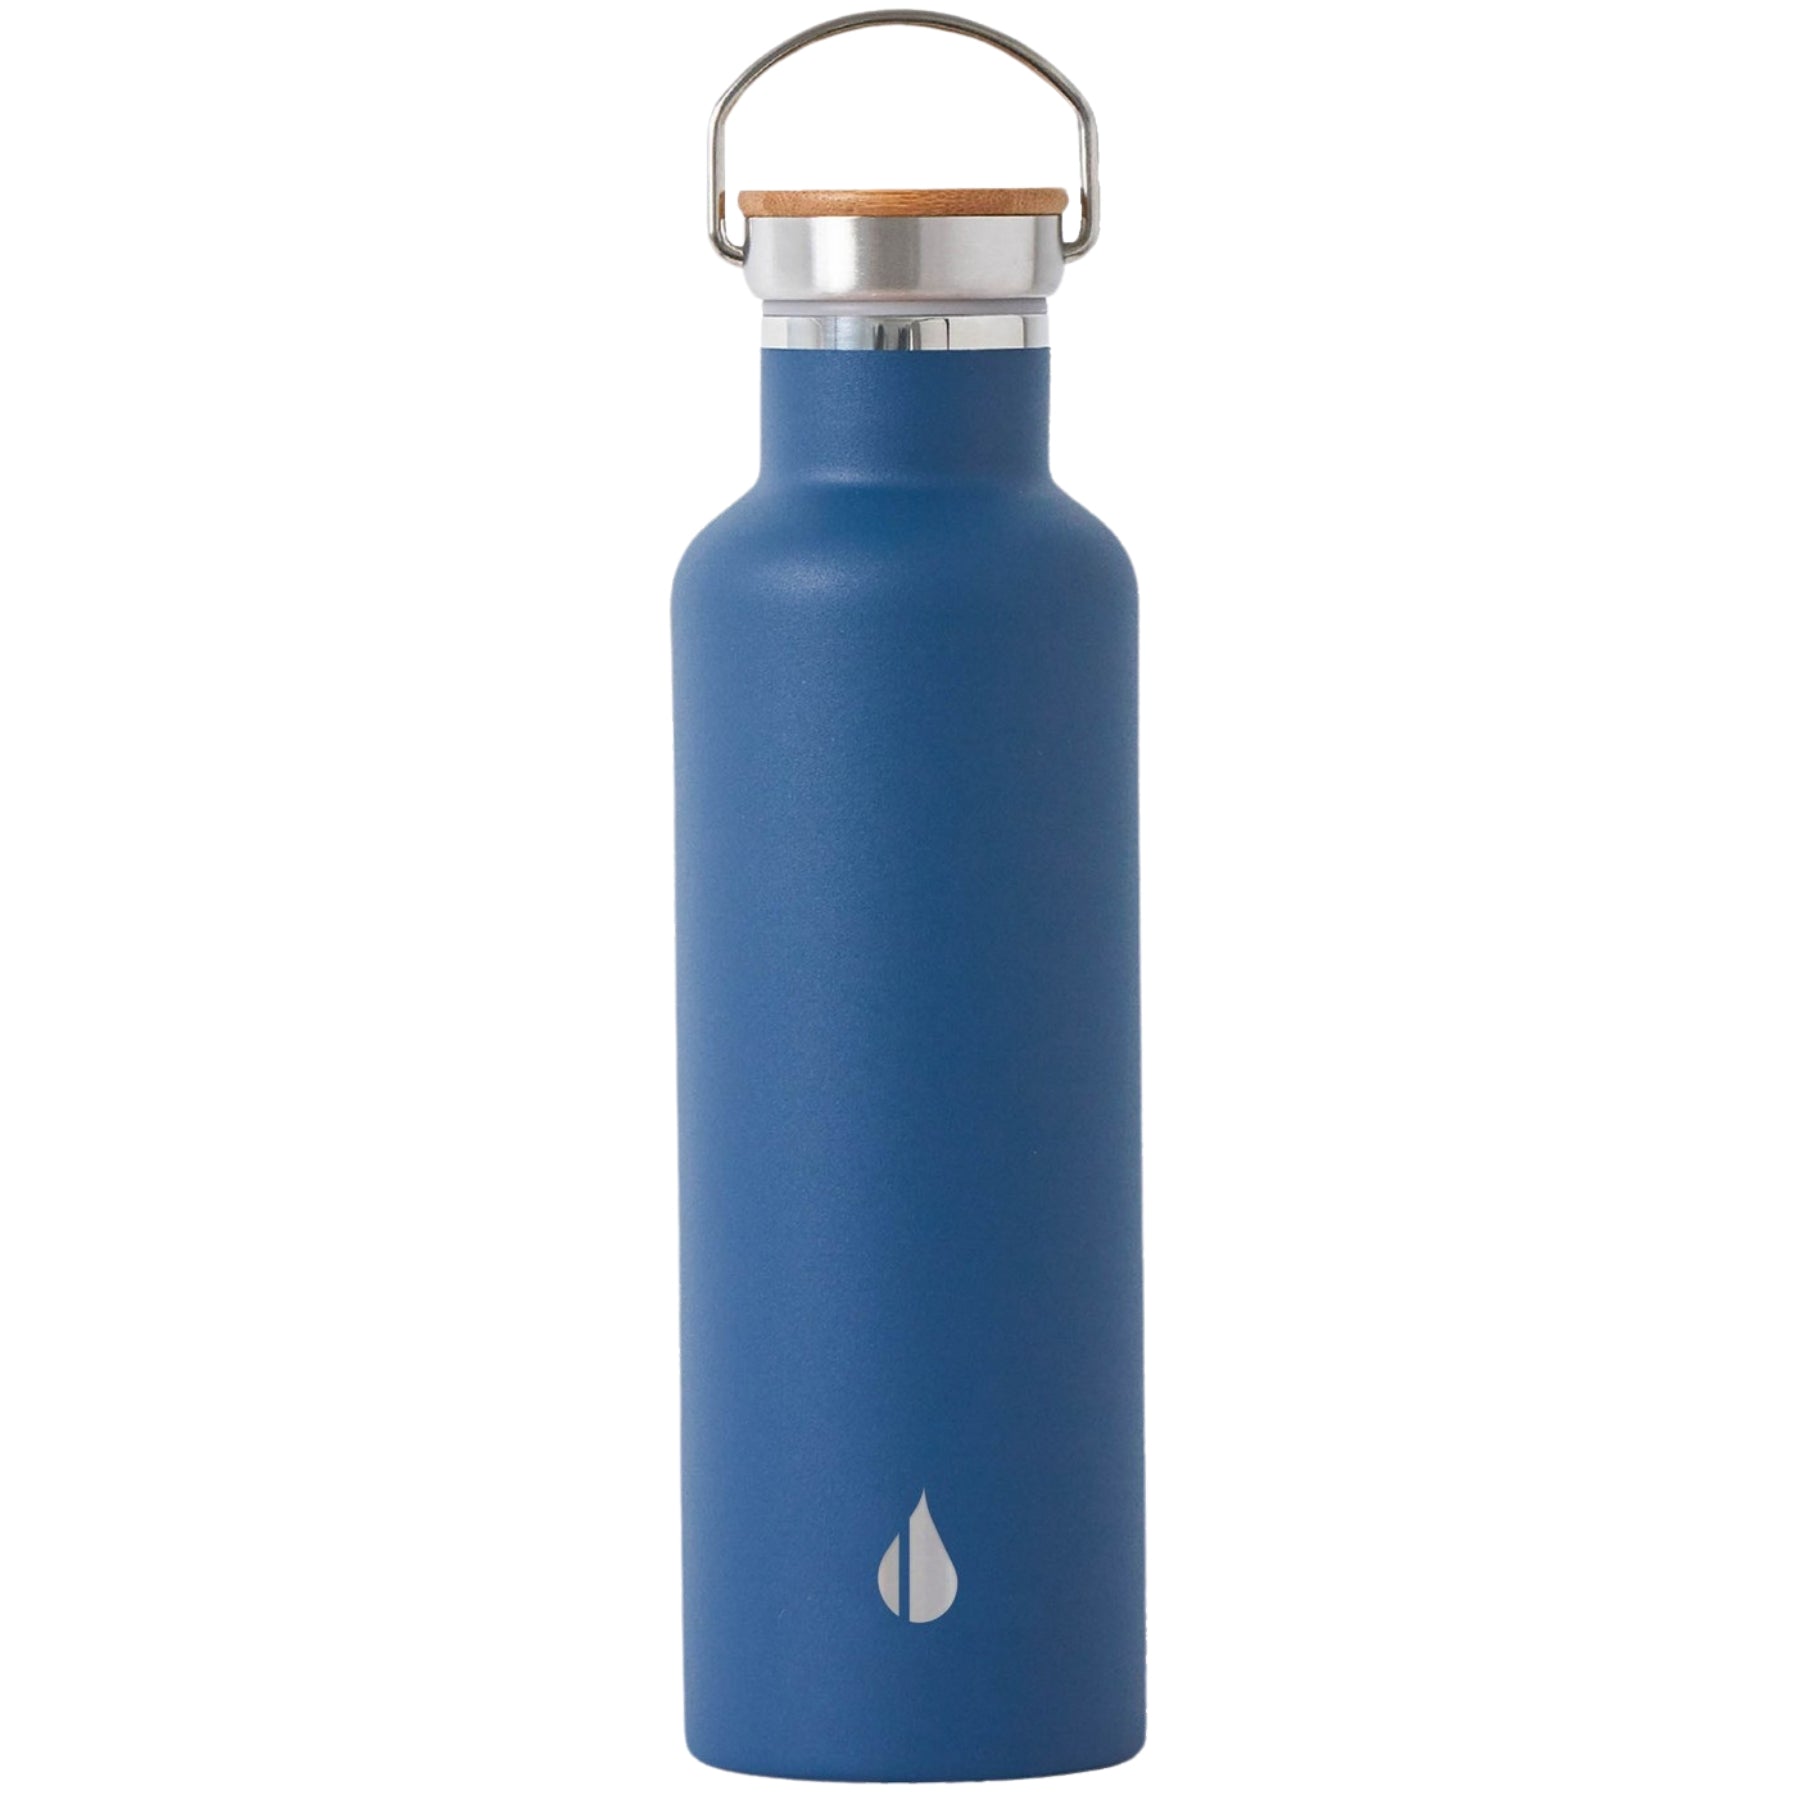 Customizable Elemental® 25 oz Stainless Steel Insulated Bottle in navy